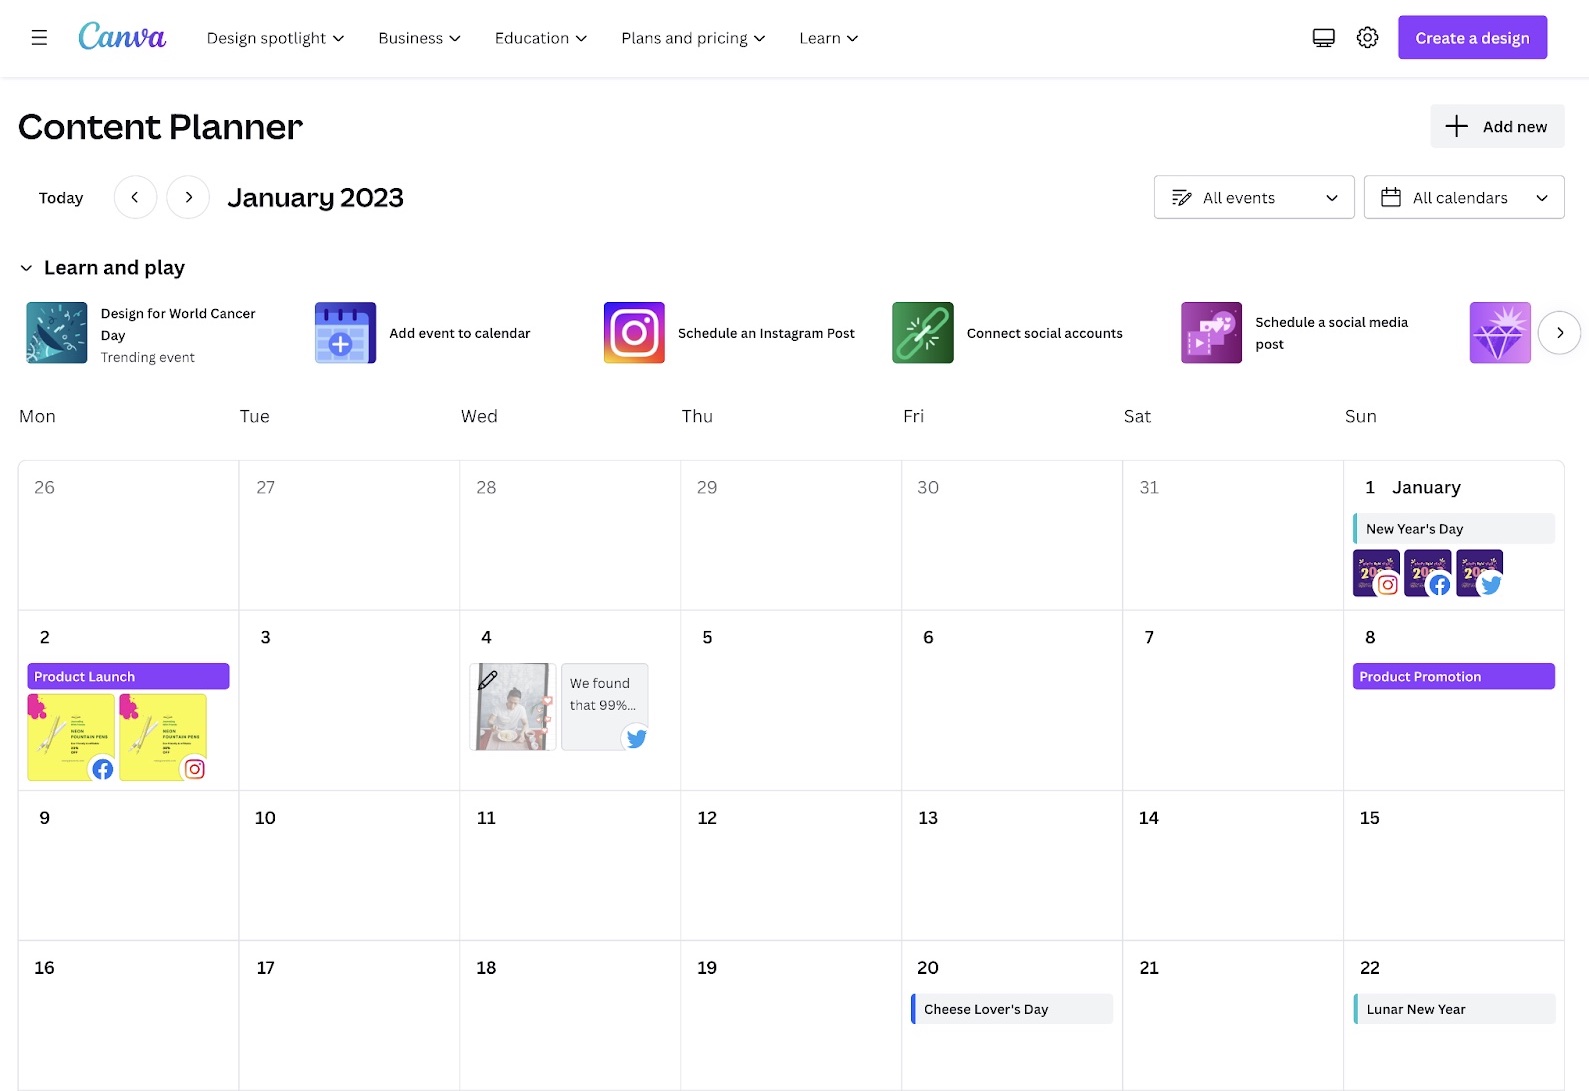 Calendar view of 'Content Planner' on Canva showing the posts scheduled across social media platforms on each day of the month.